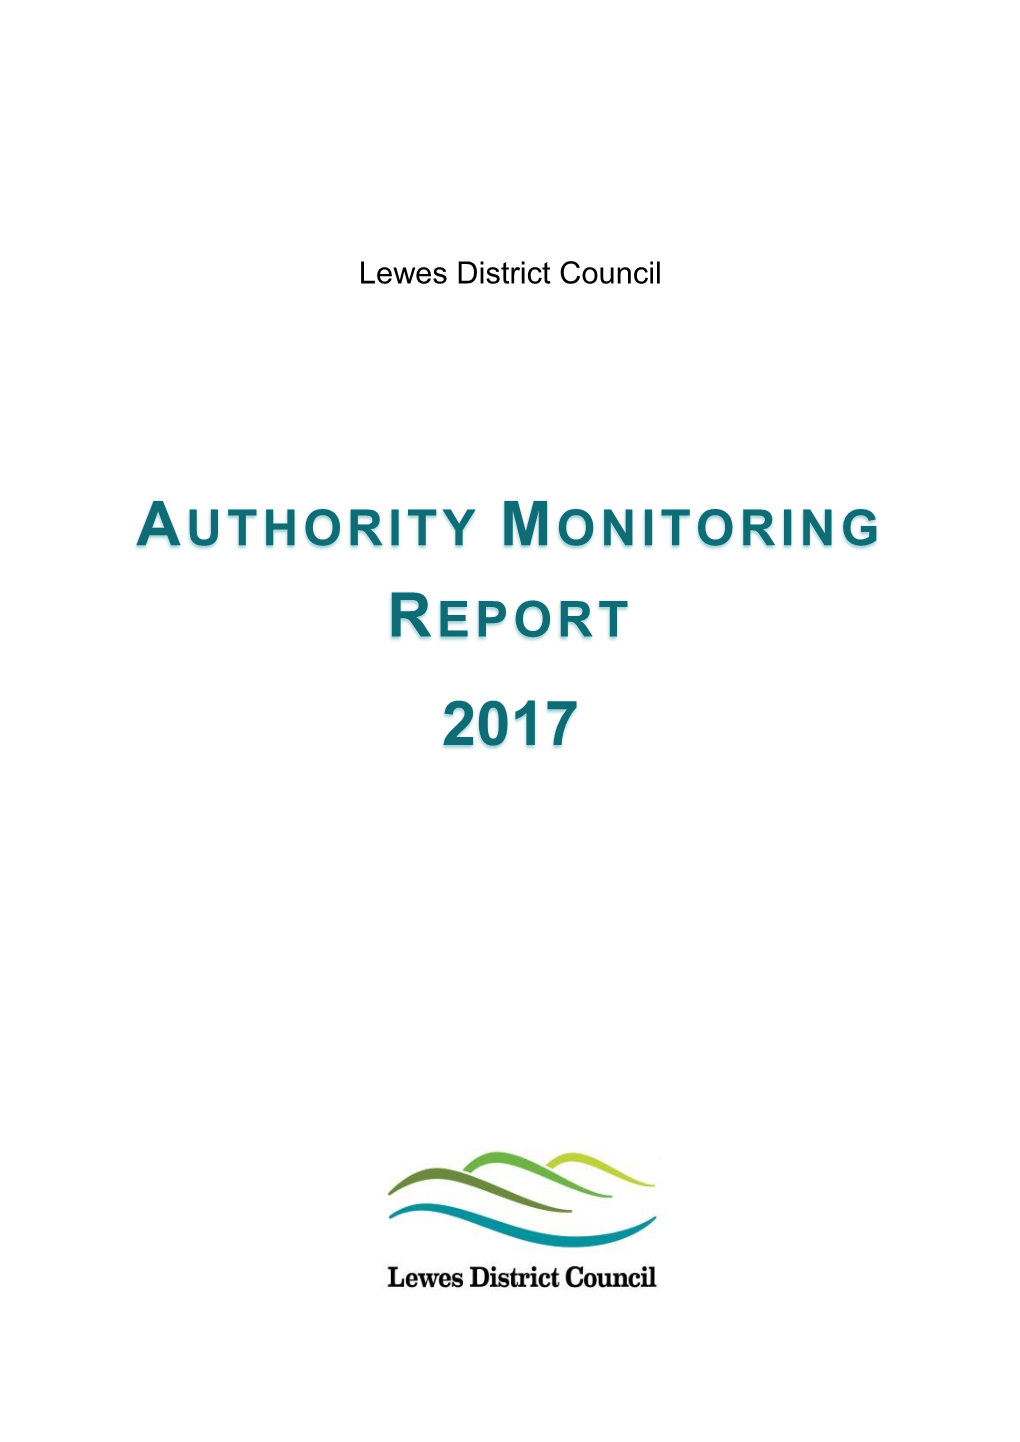 Authority Monitoring Report 2017